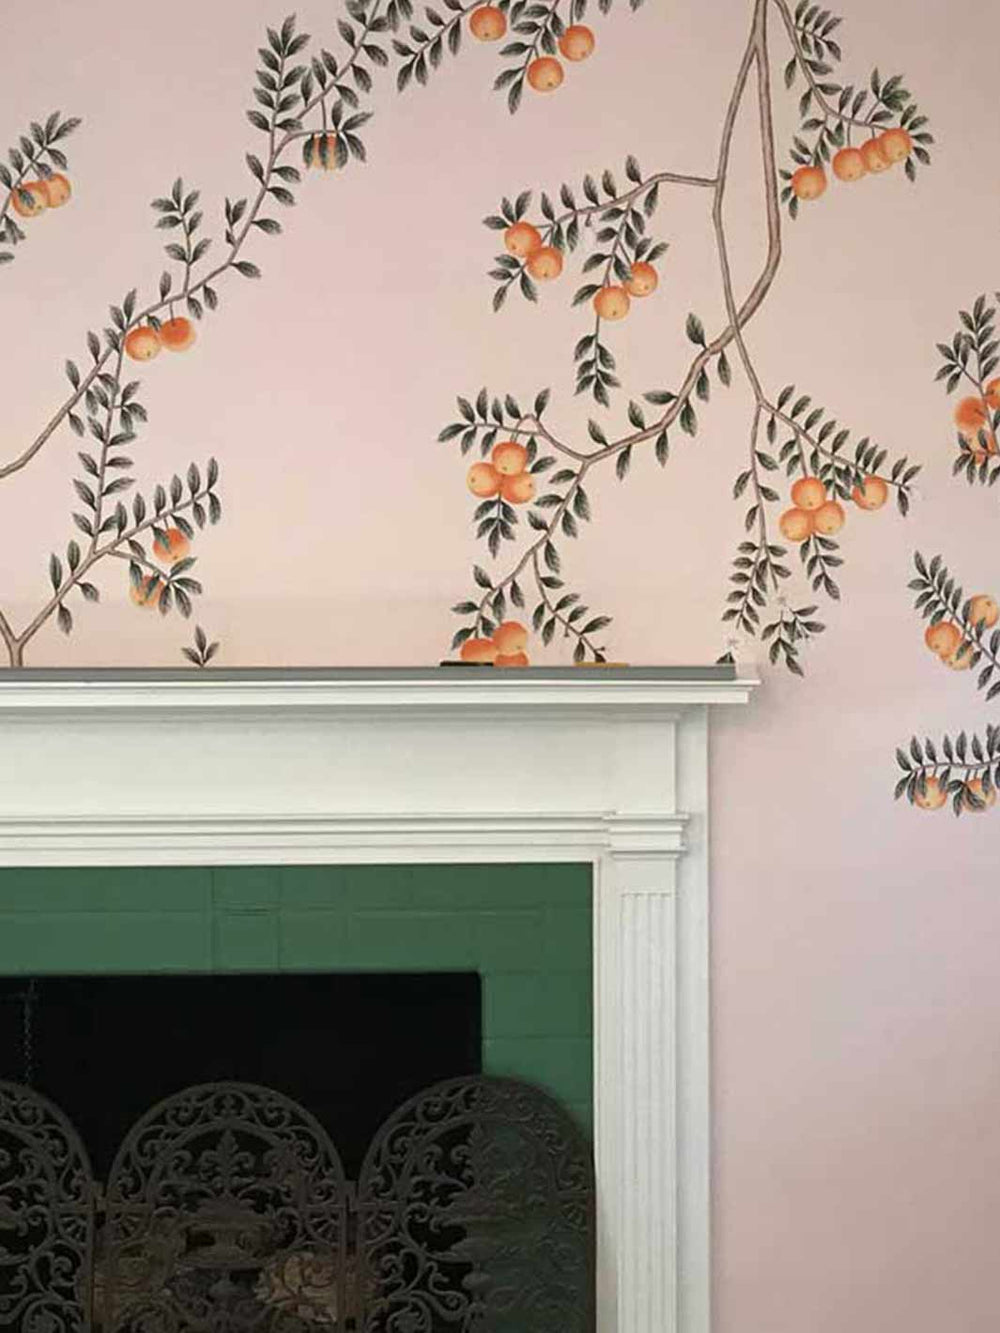 Aqualille Honeybell orange wallpaper by a fireplace